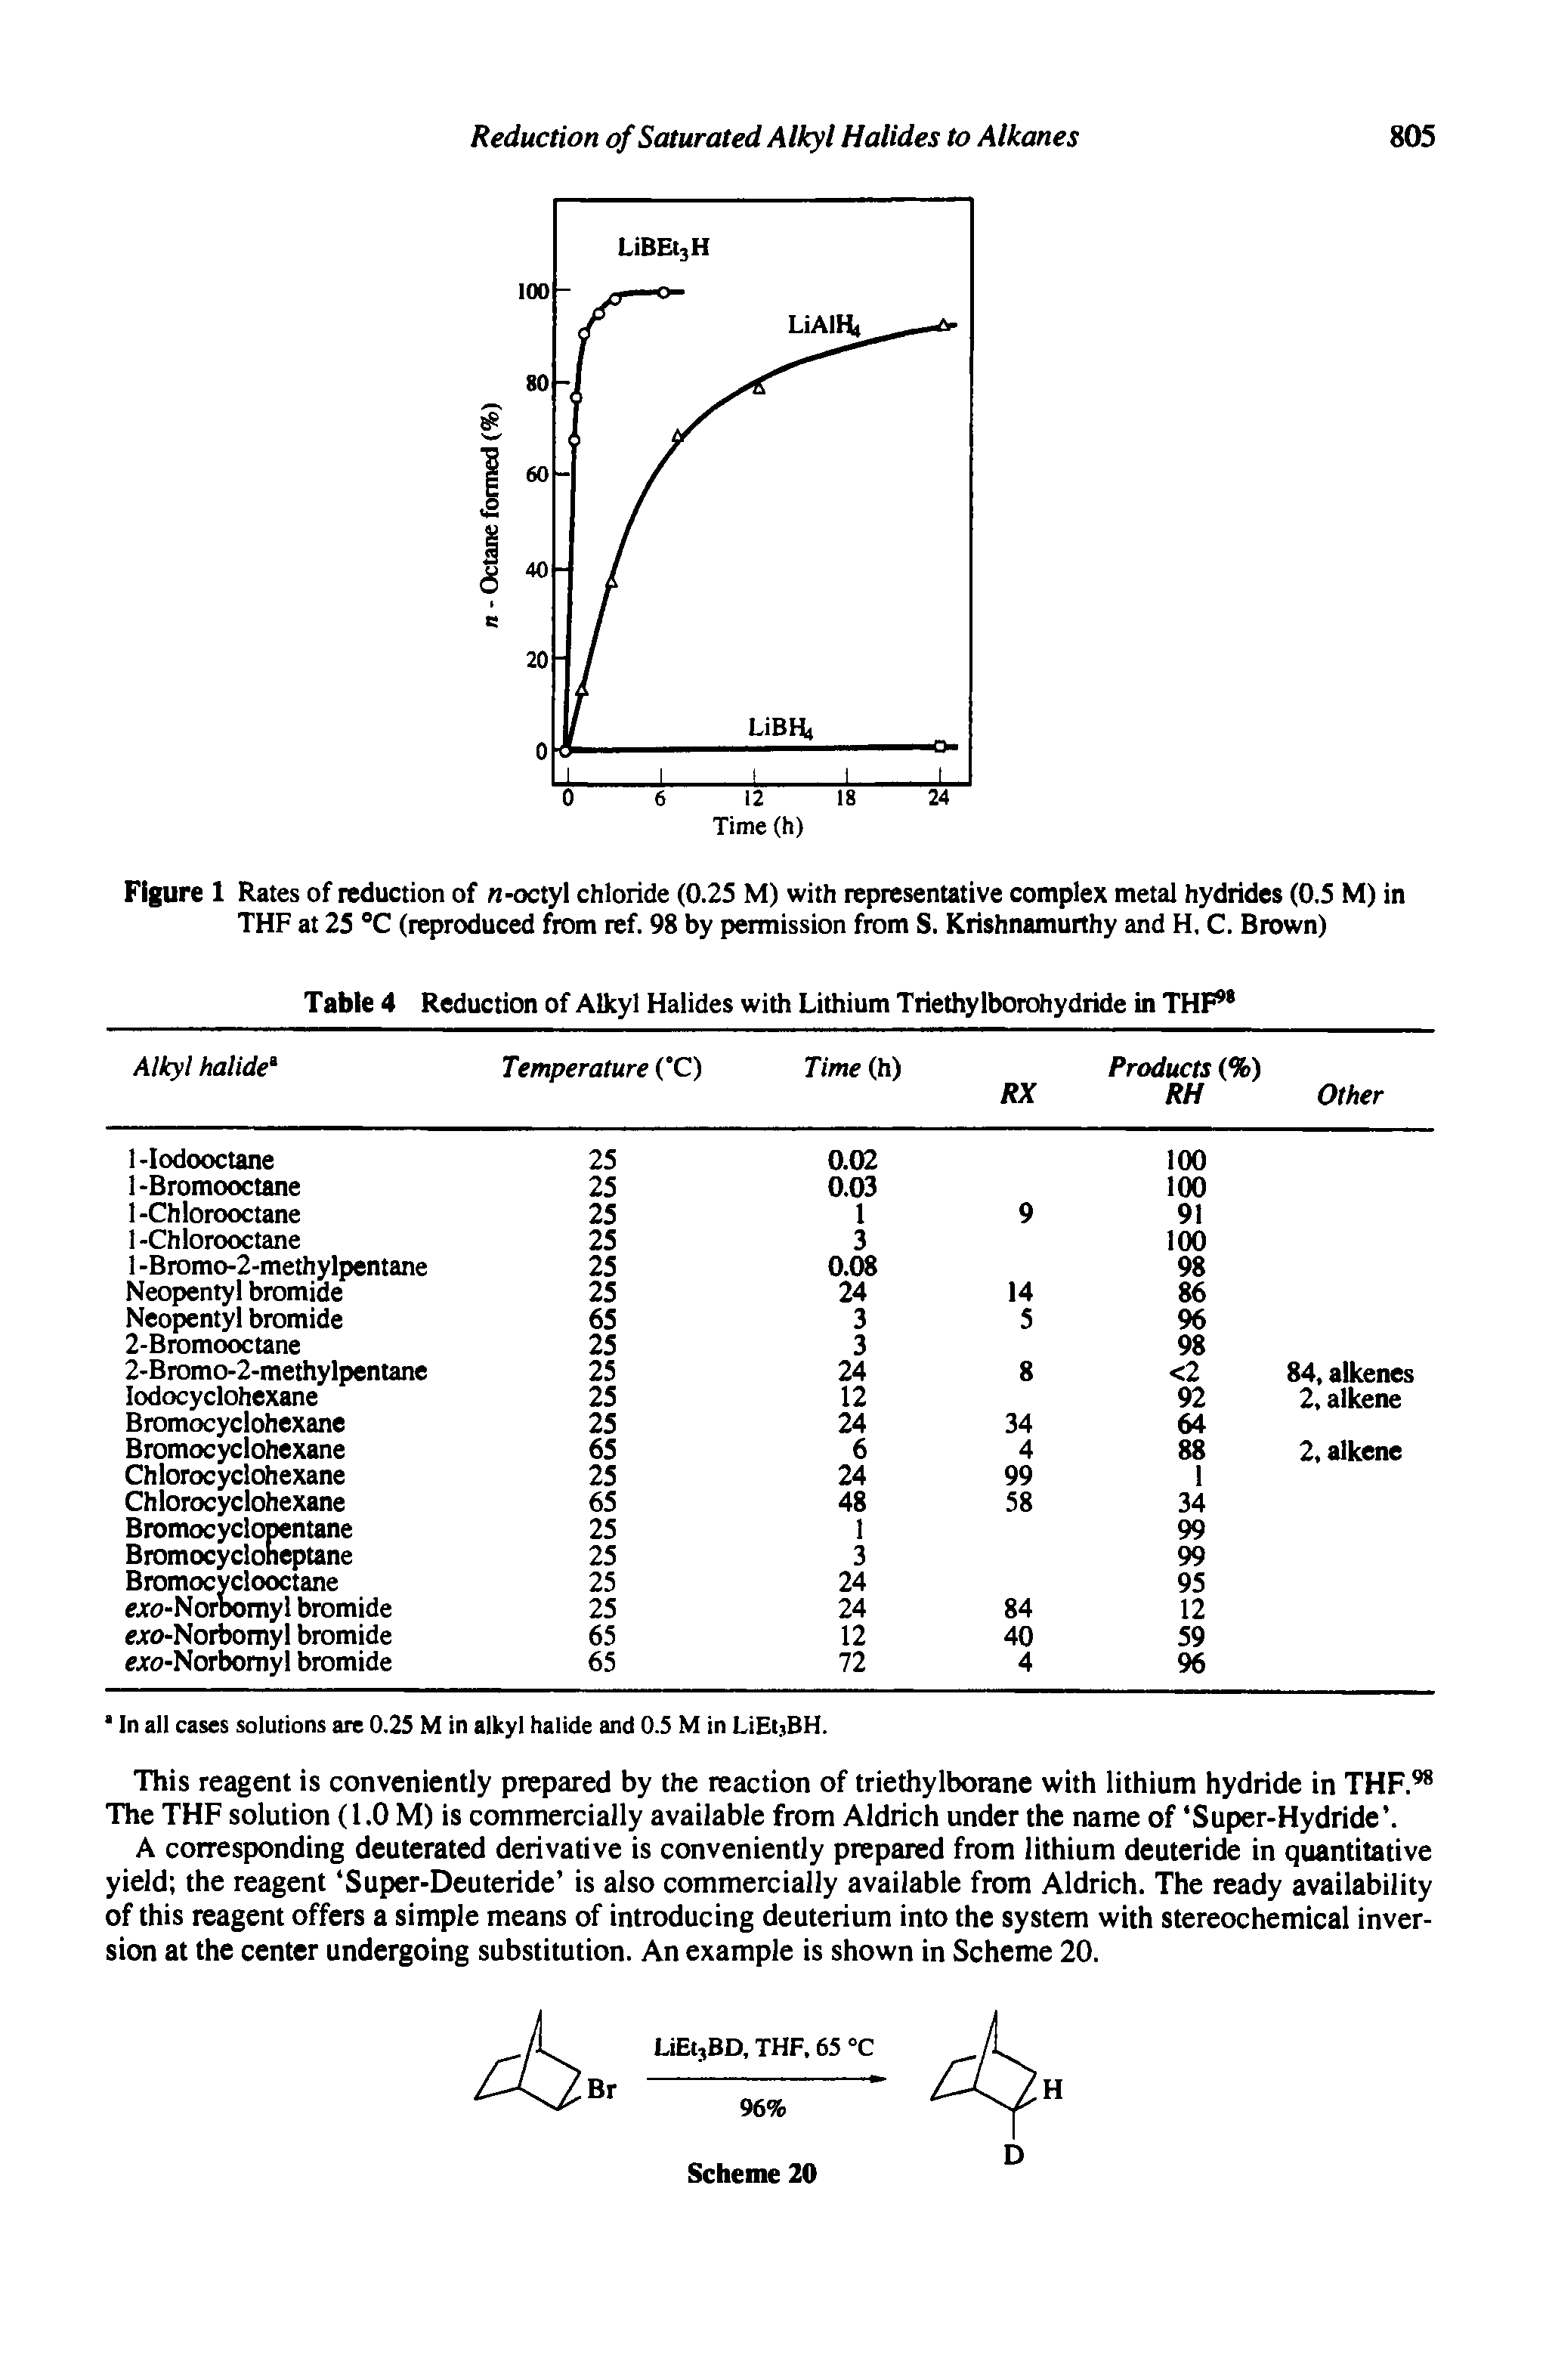 Figure 1 Rates of reduction of k-octyl chloride (0.25 M) with representative complex metal hydrides (0.5 M) in THF at 25 °C (reproduced from ref. 98 by permission from S. Krishnamurthy and H. C. Brown)...